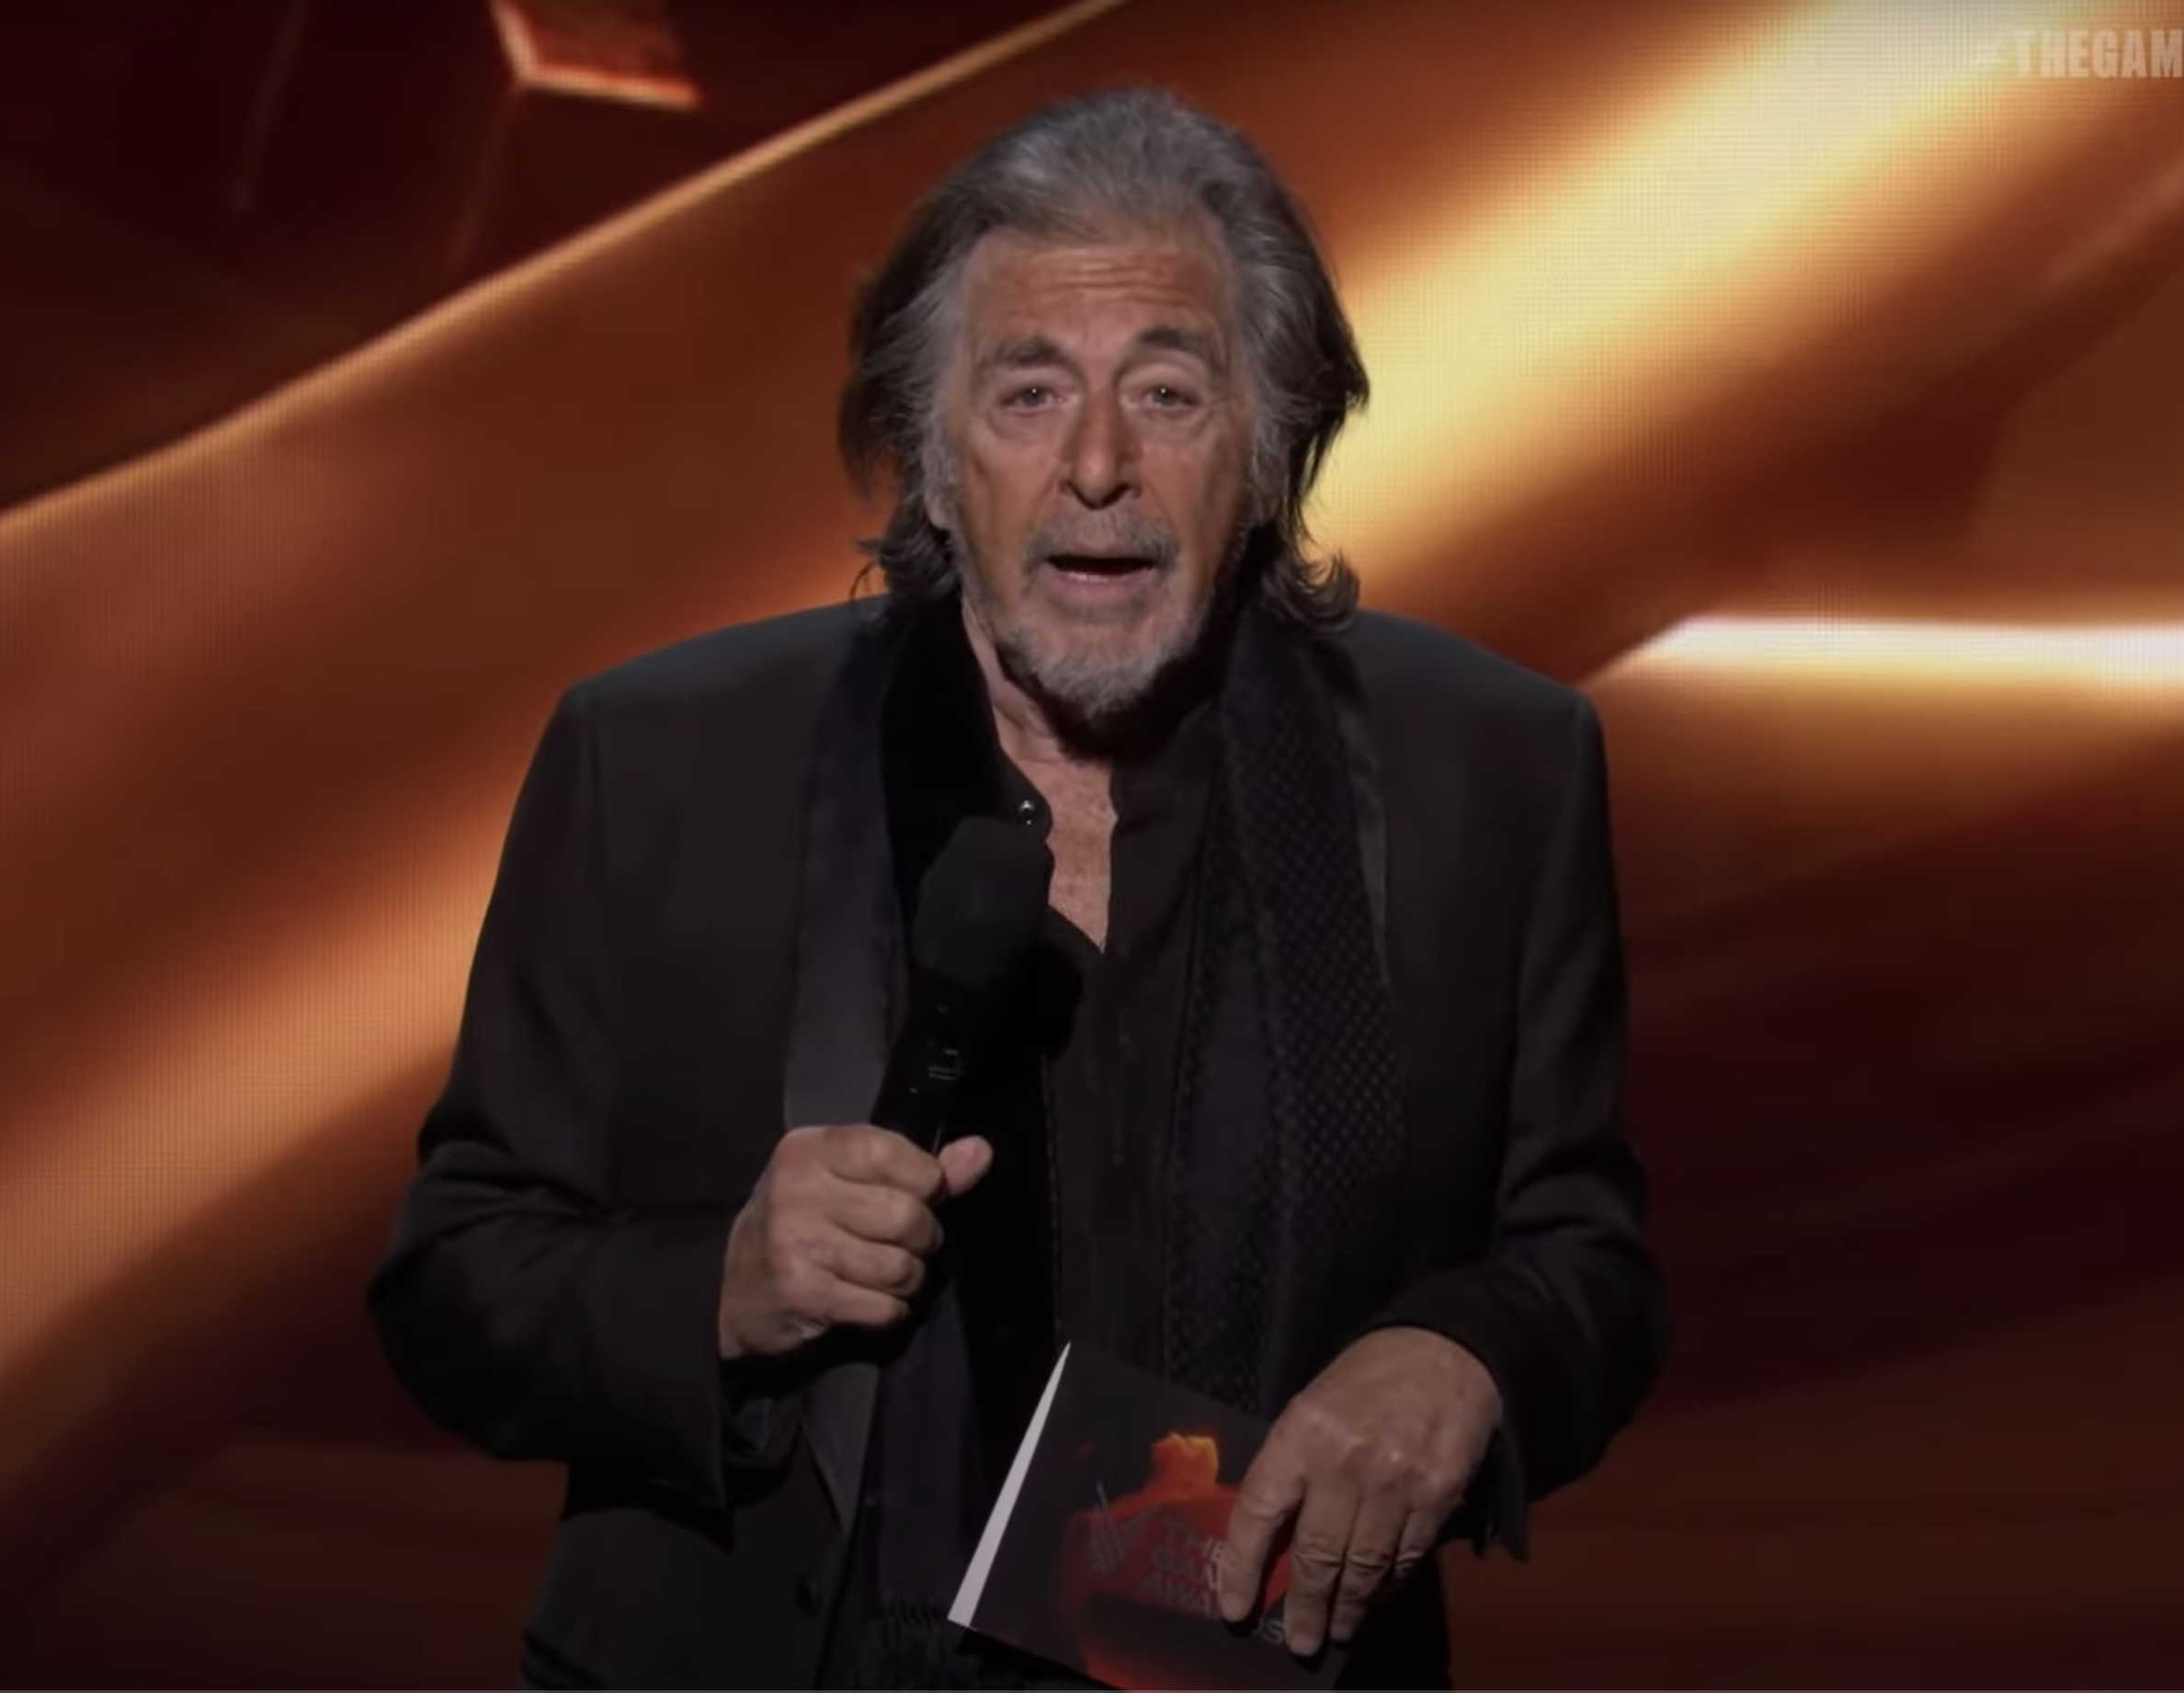 Al Pacino admits he doesn't play video games much while delivering